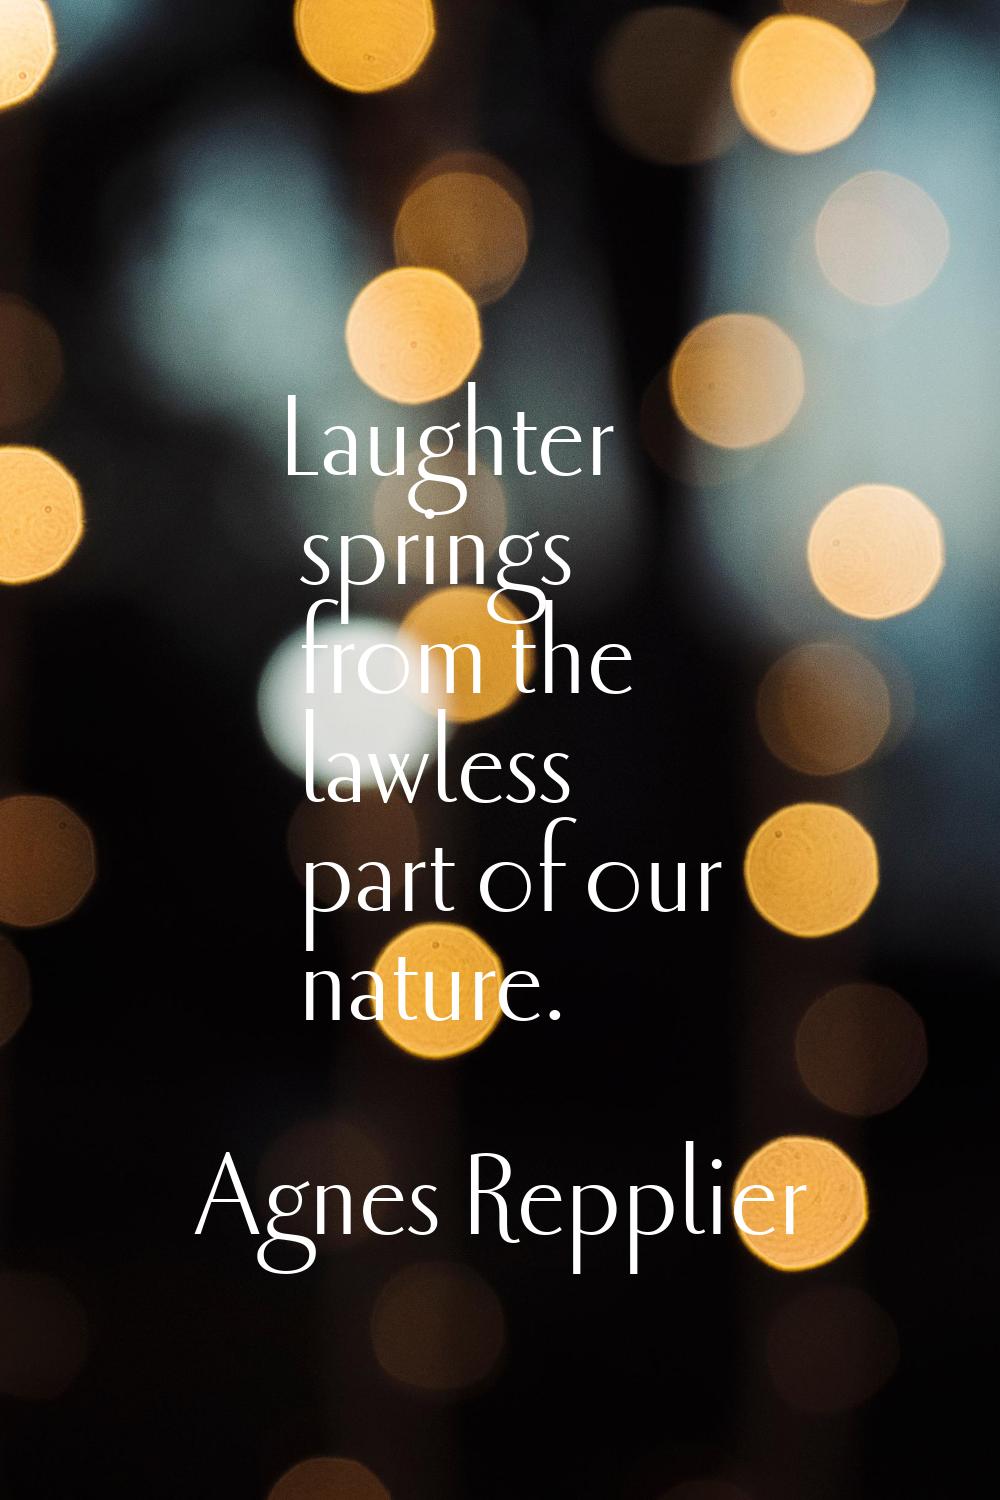 Laughter springs from the lawless part of our nature.